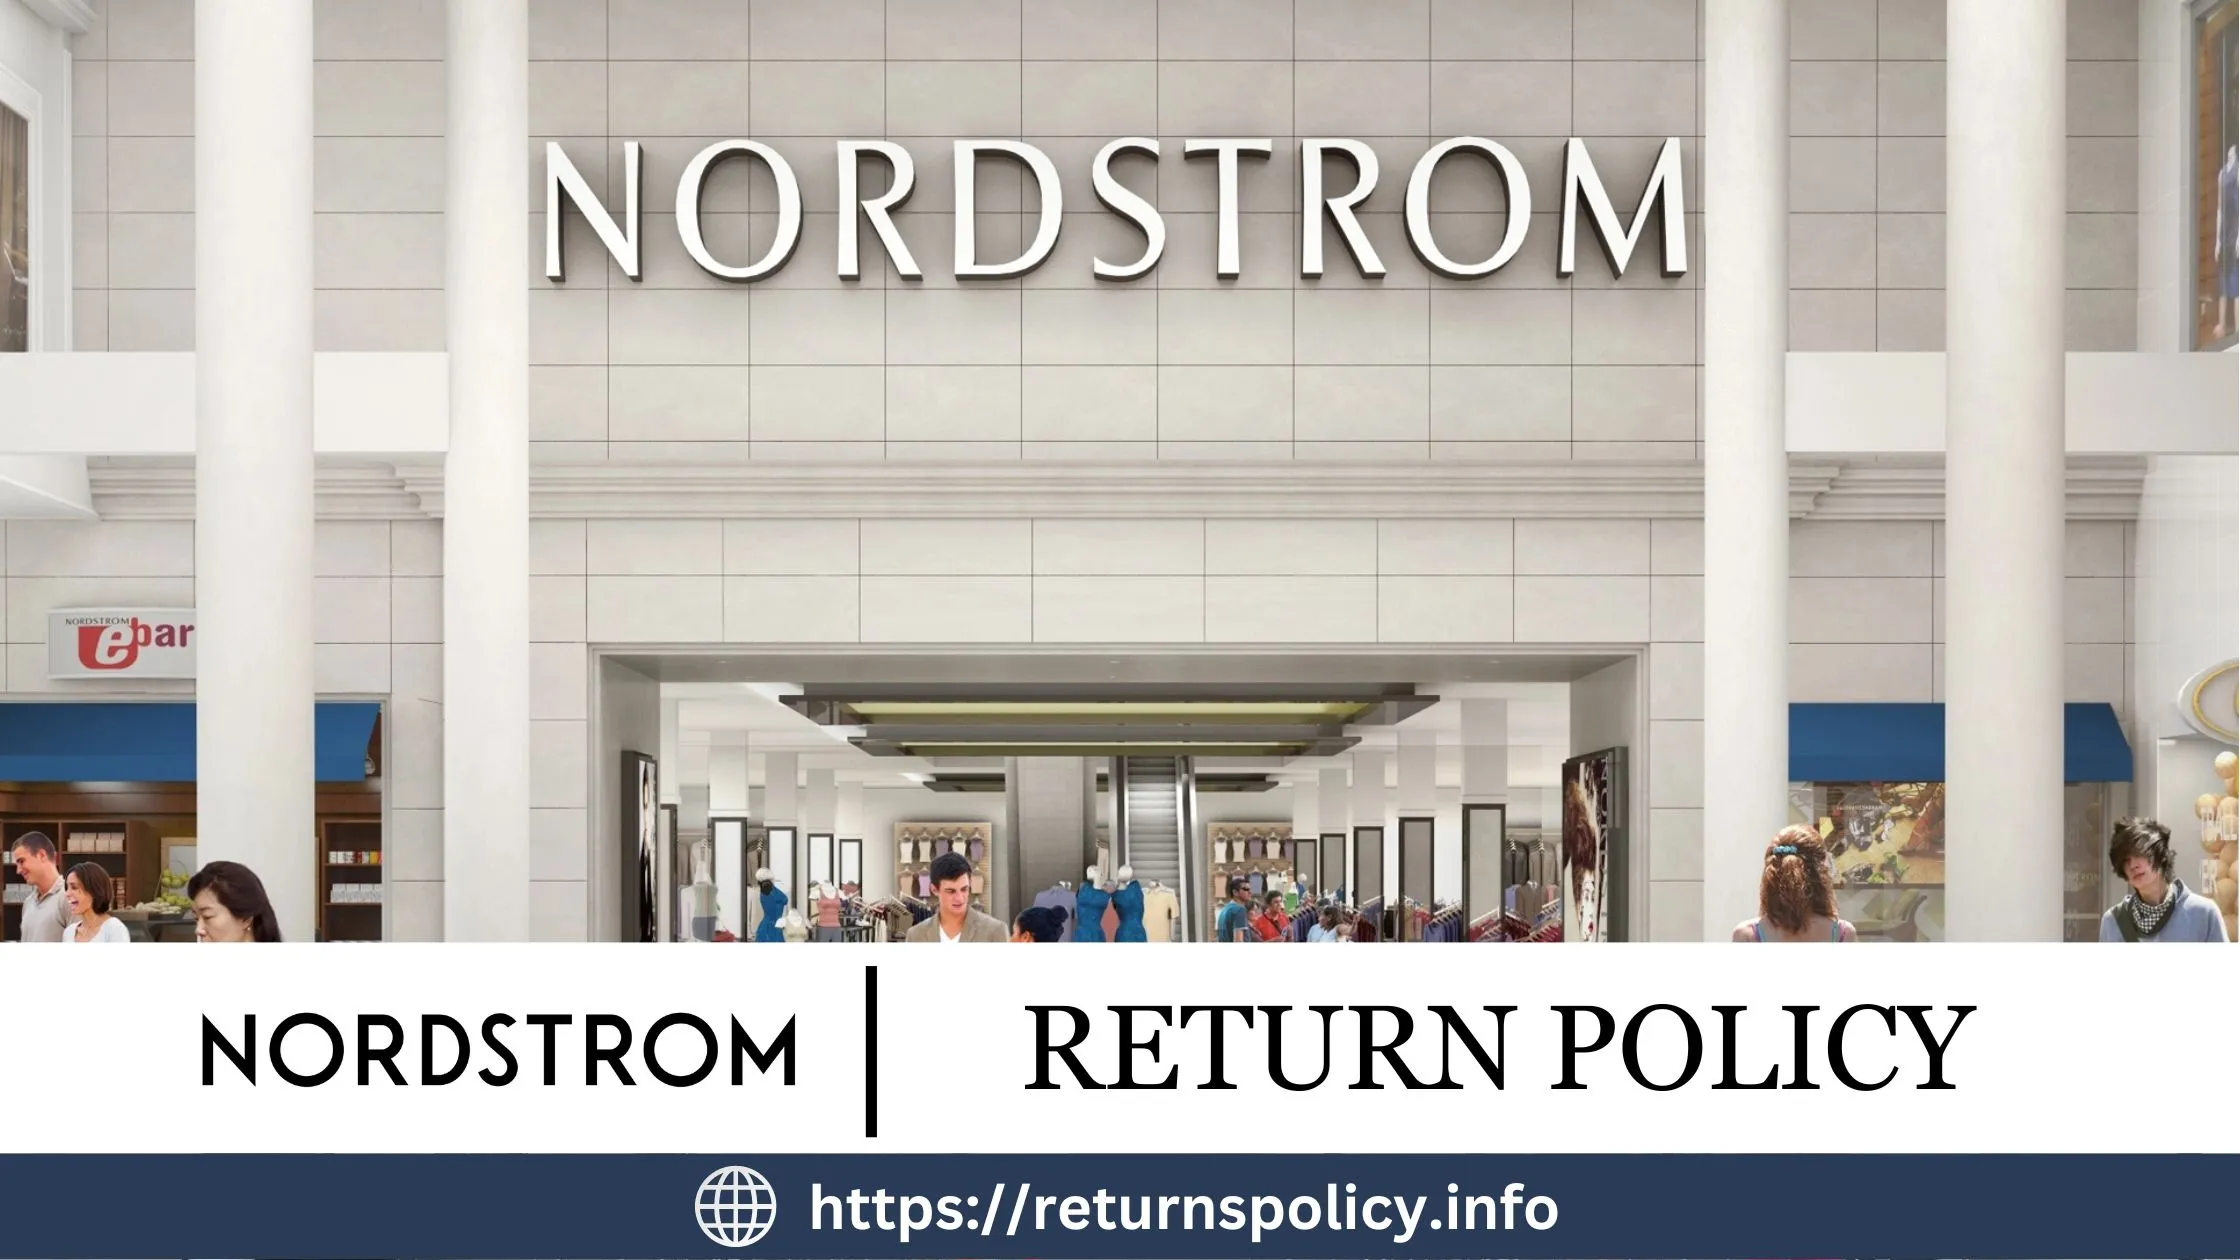 nordstrom-RETURN-POLICY